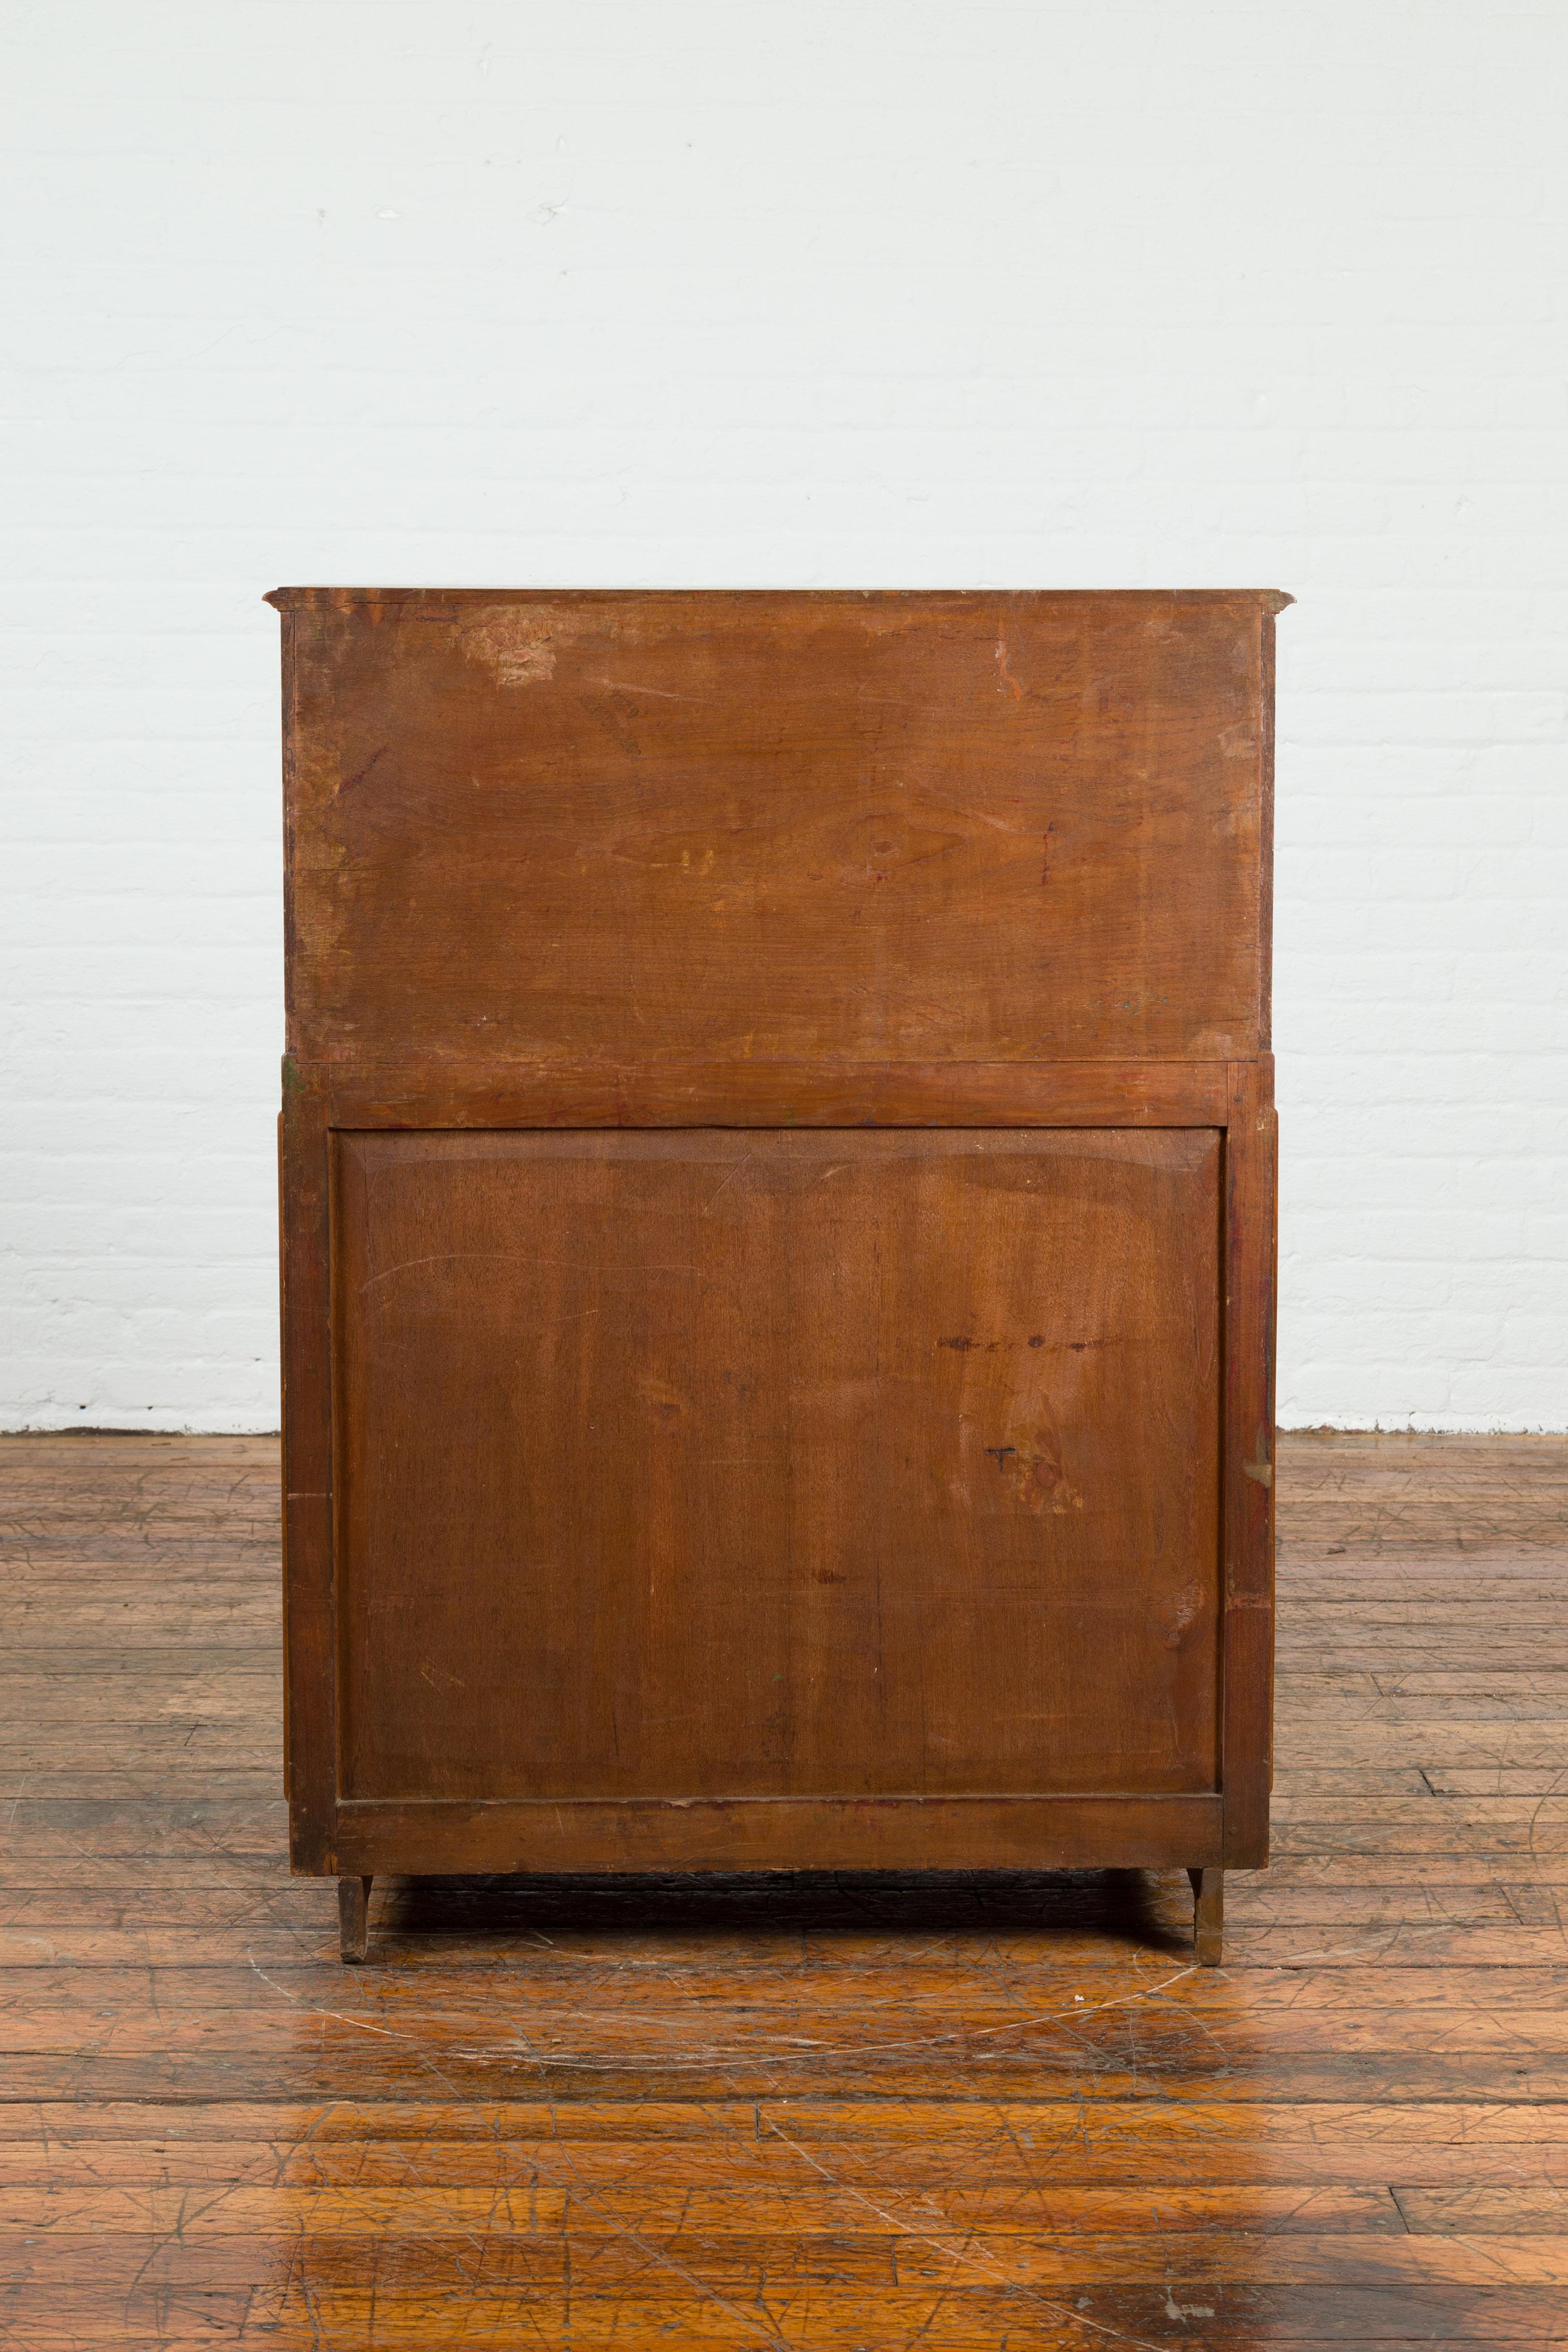 Indonesian 19th Century Handmade Slant-Front Desk with Raised Panels and Drawers For Sale 7